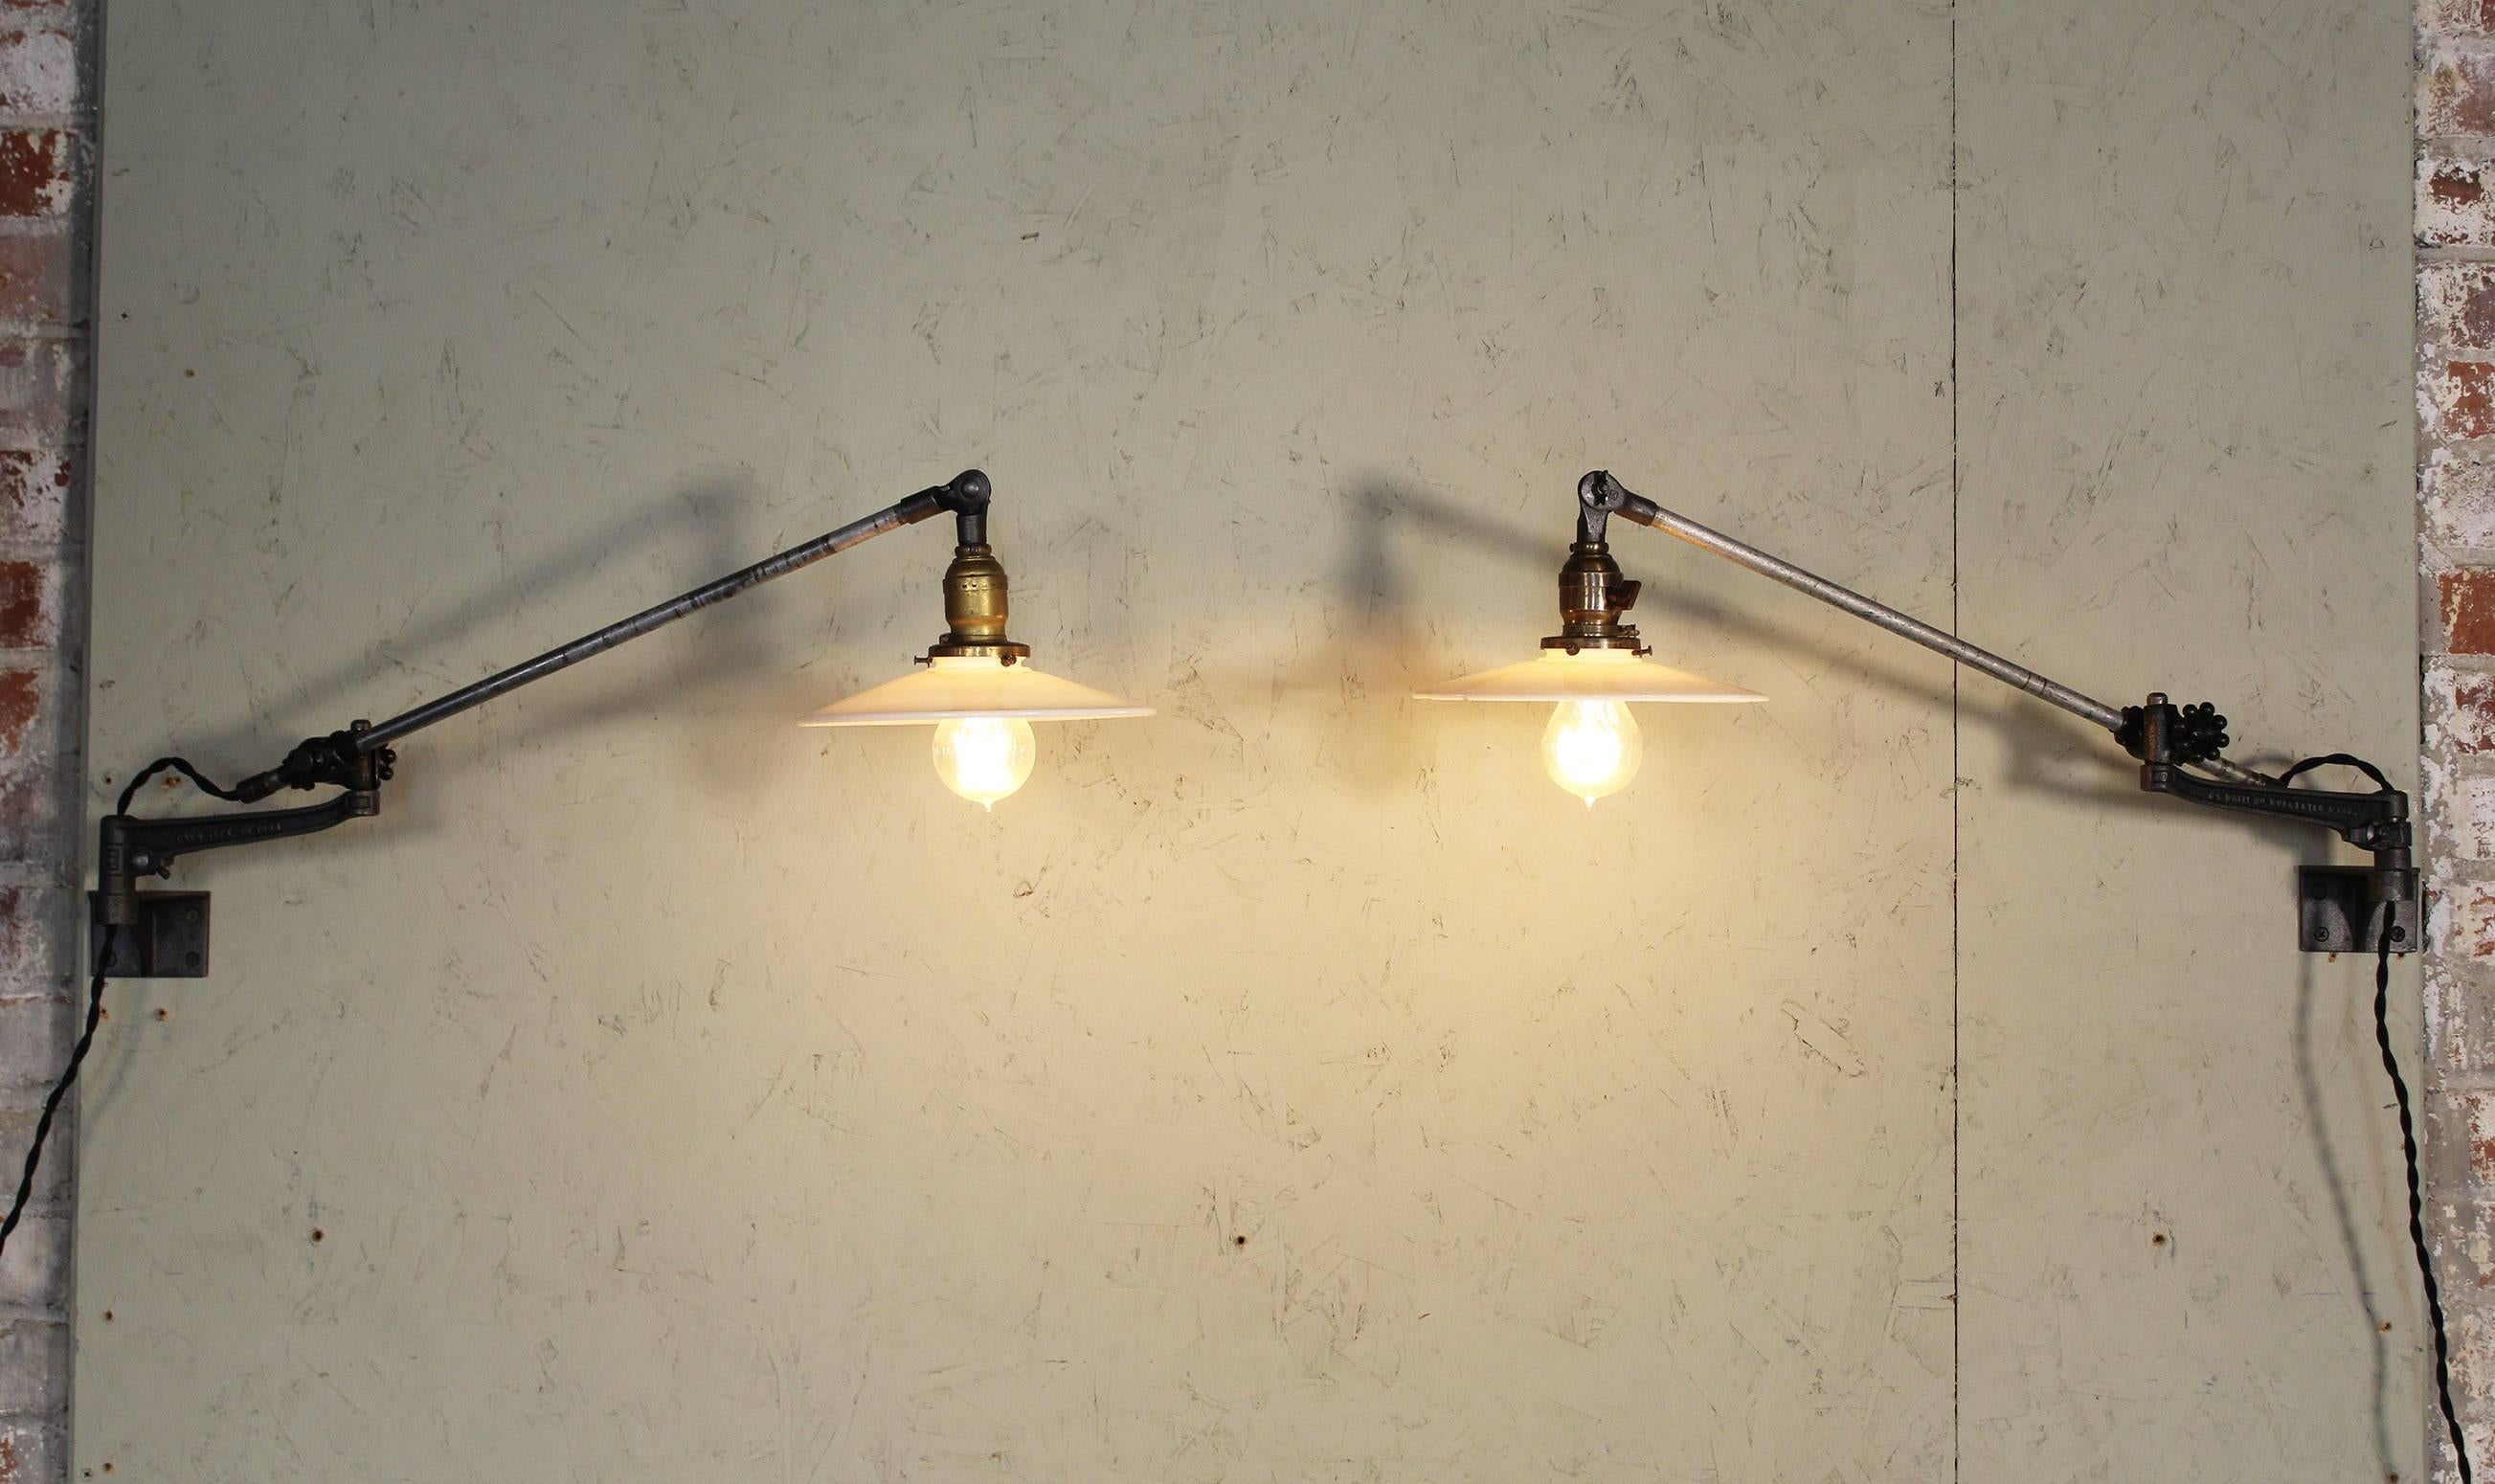 Pair of vintage Industrial milk glass O.C. White wall task lamps, lights with Edison Bulbs. Articulating lamps with cast iron knob adjustment fittings. Milk glass shades measure 9 1/4